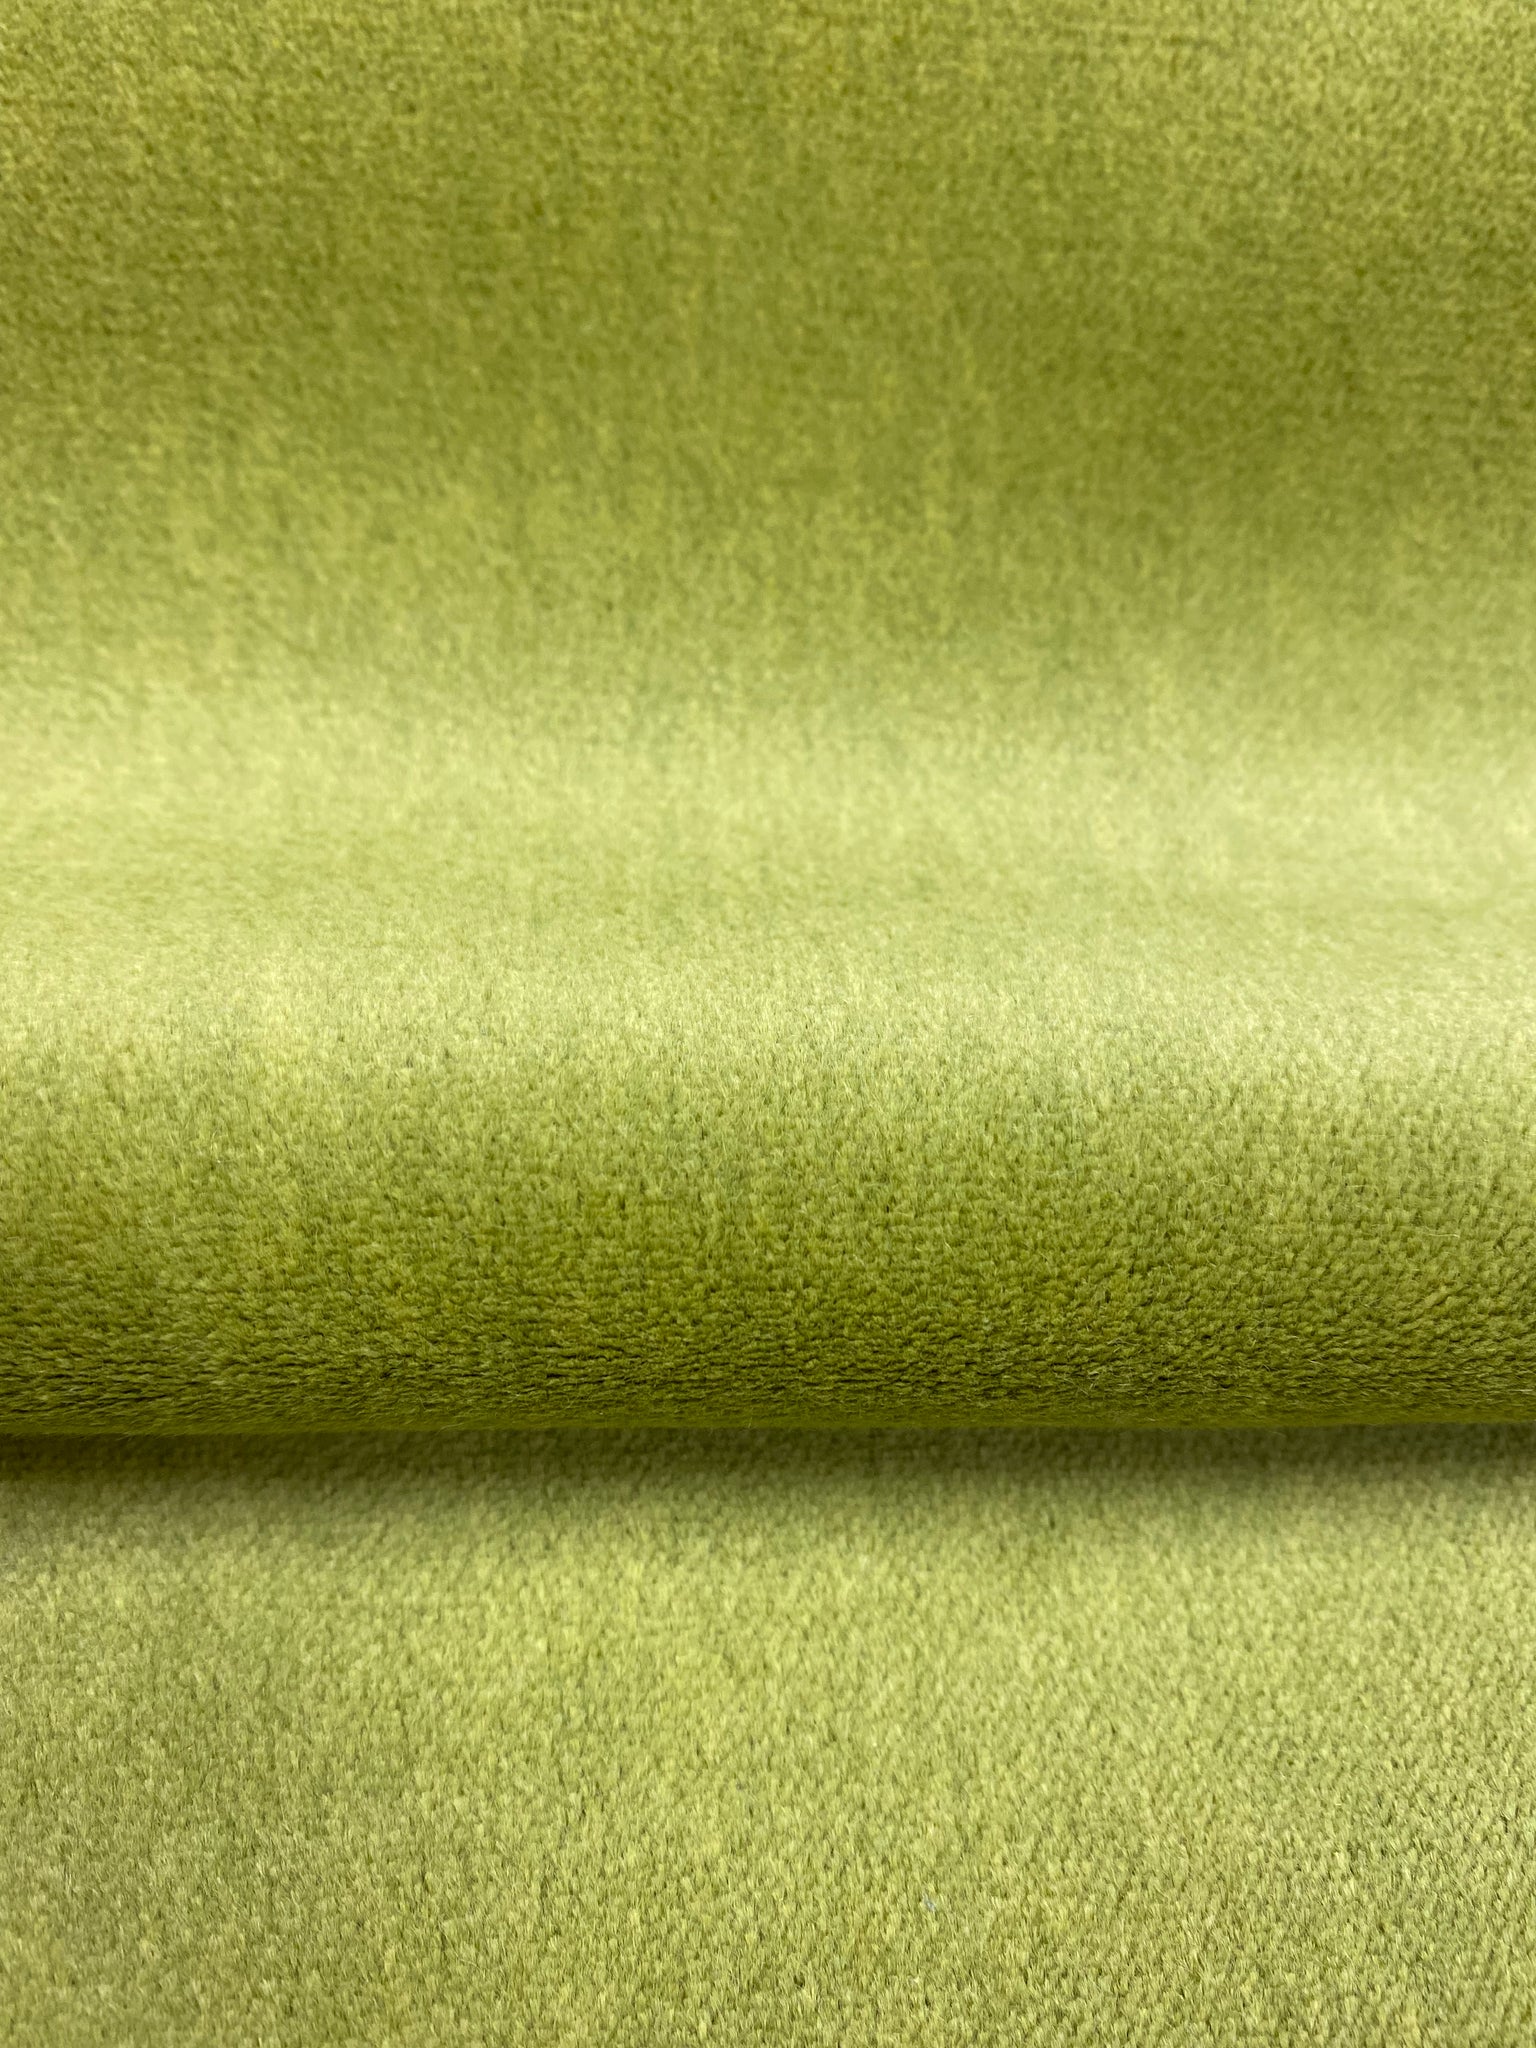 HHF Imperial Pistachio - Green Rayon Velvet Upholstery Fabric